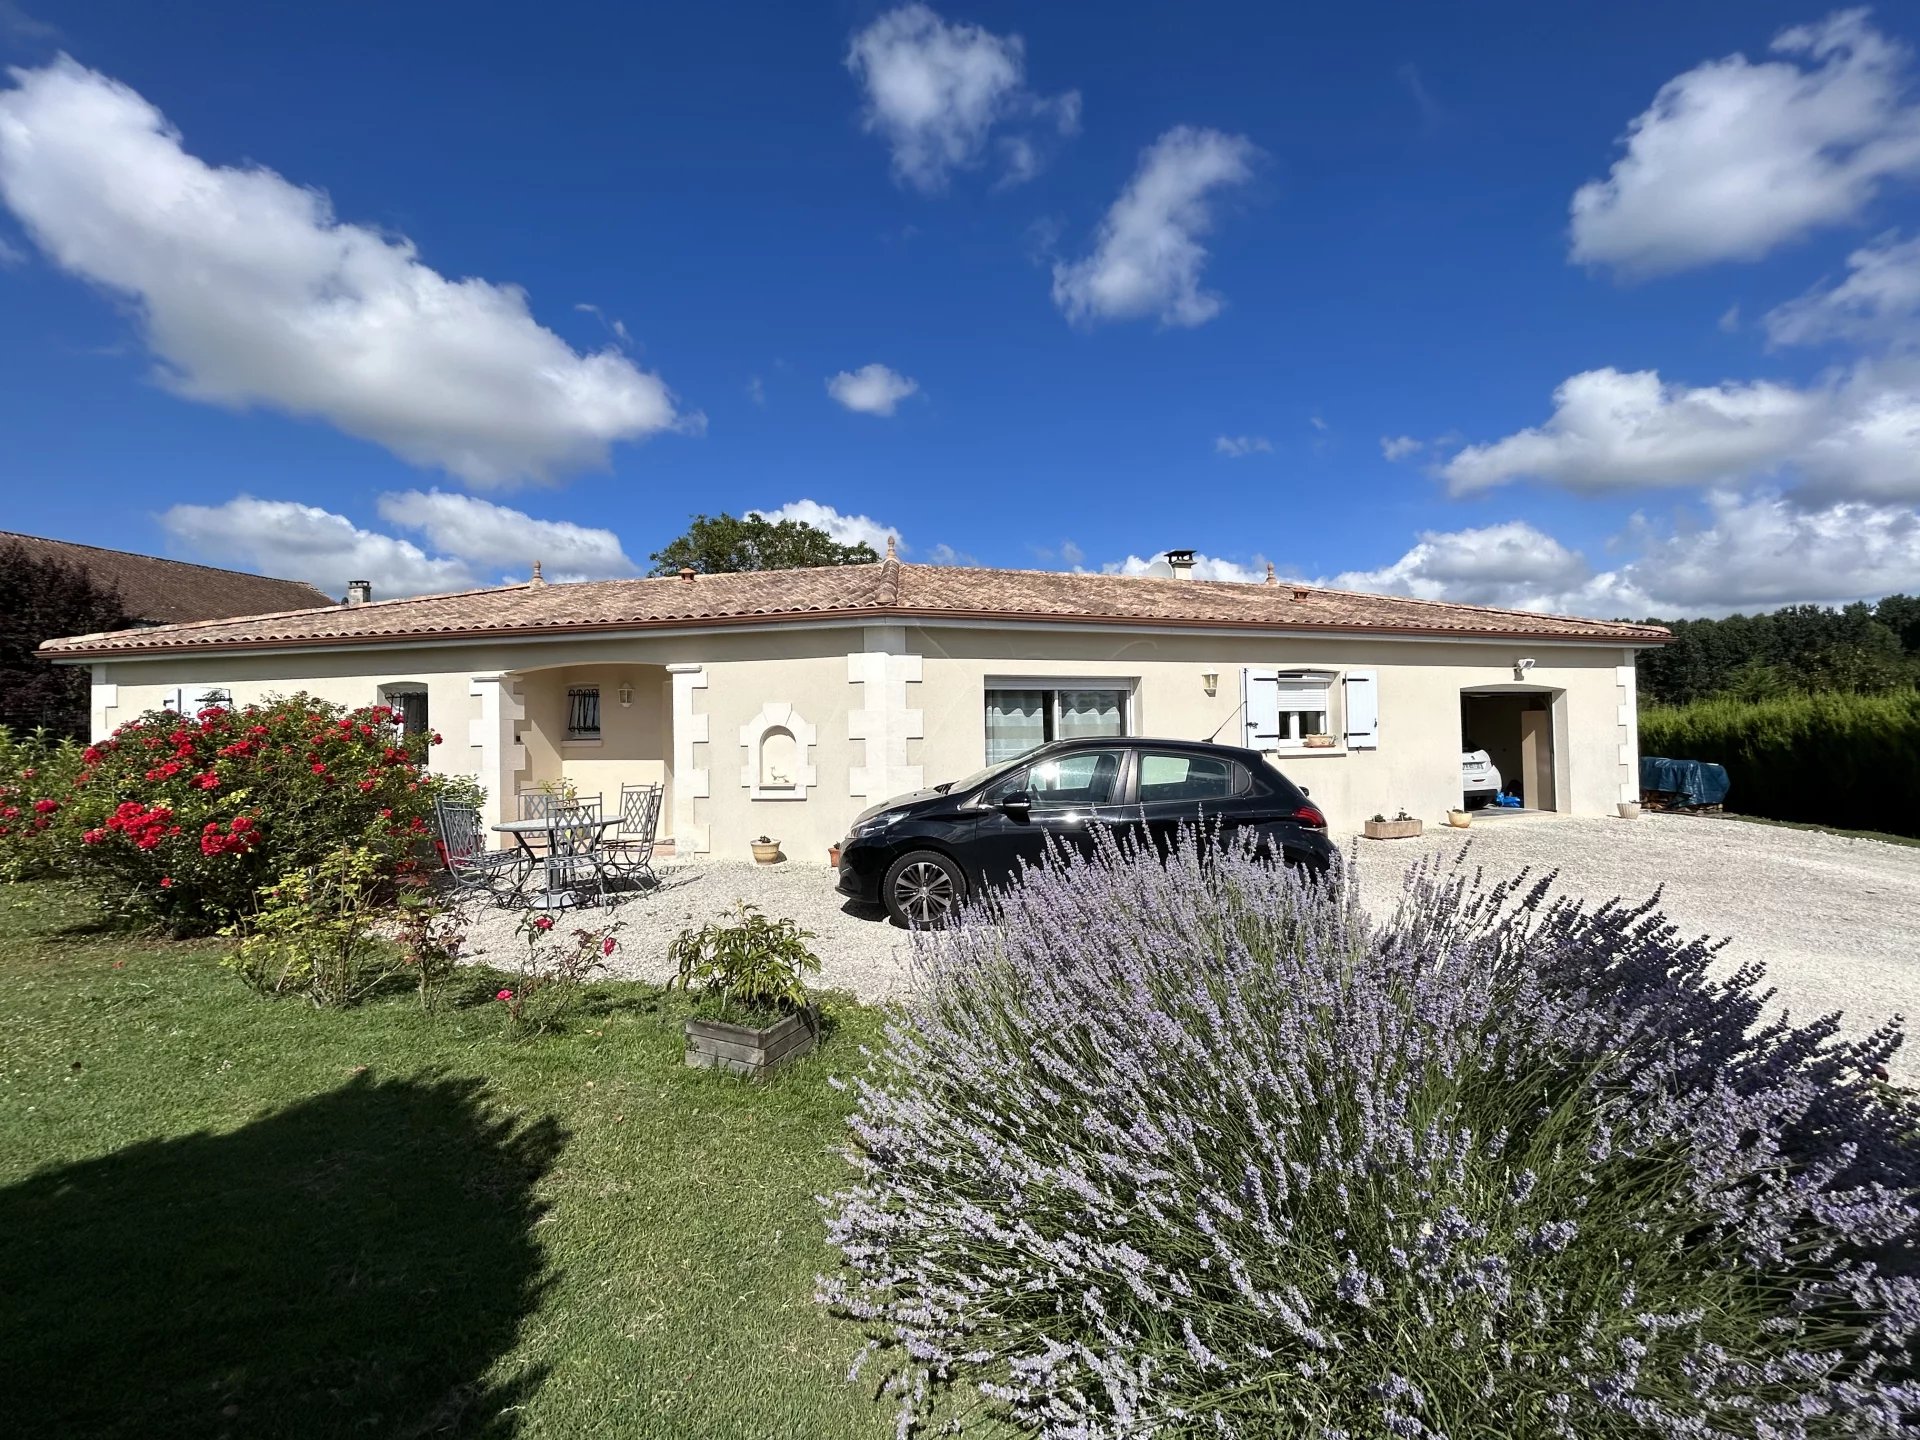 For sale: Charming bungalow in the countryside near Barbezieux-Saint-Hilaire